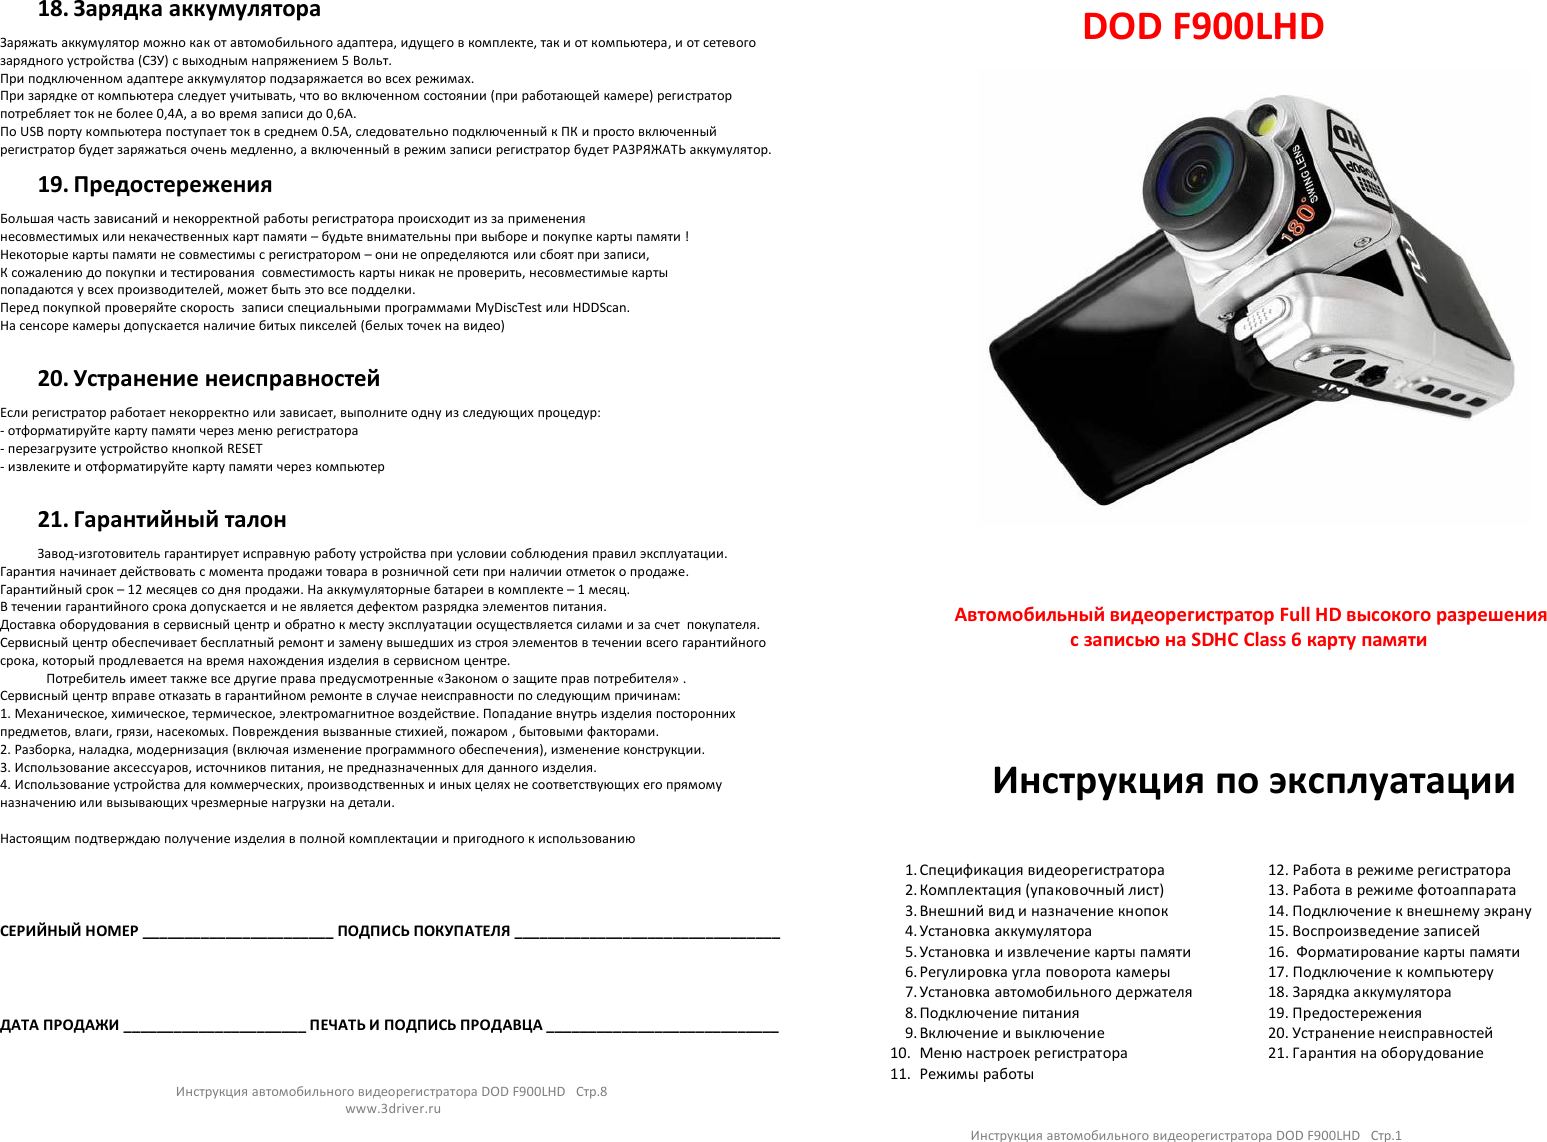 Page 1 of 4 - F900LHD Russian Manual  0 832